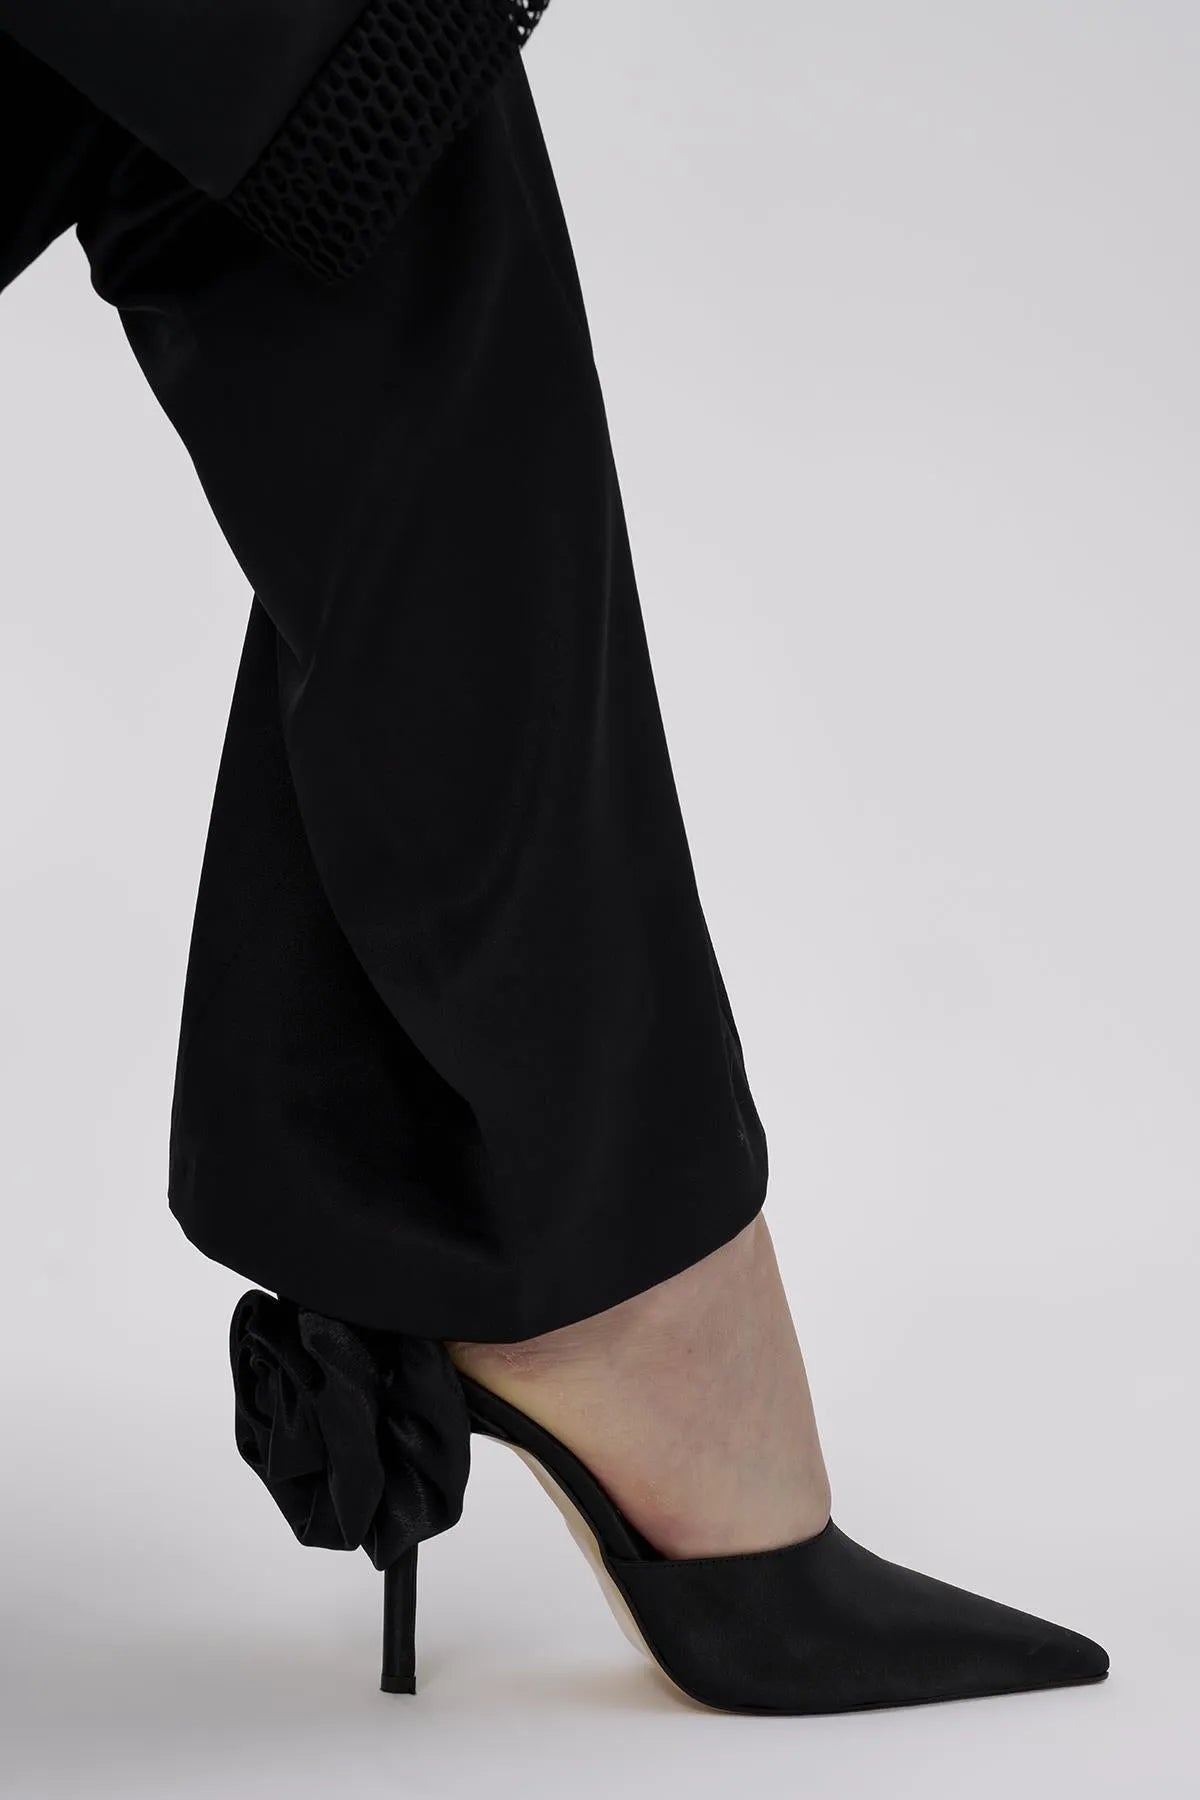 Satin Evening Dress Shoes with Roses on the Back